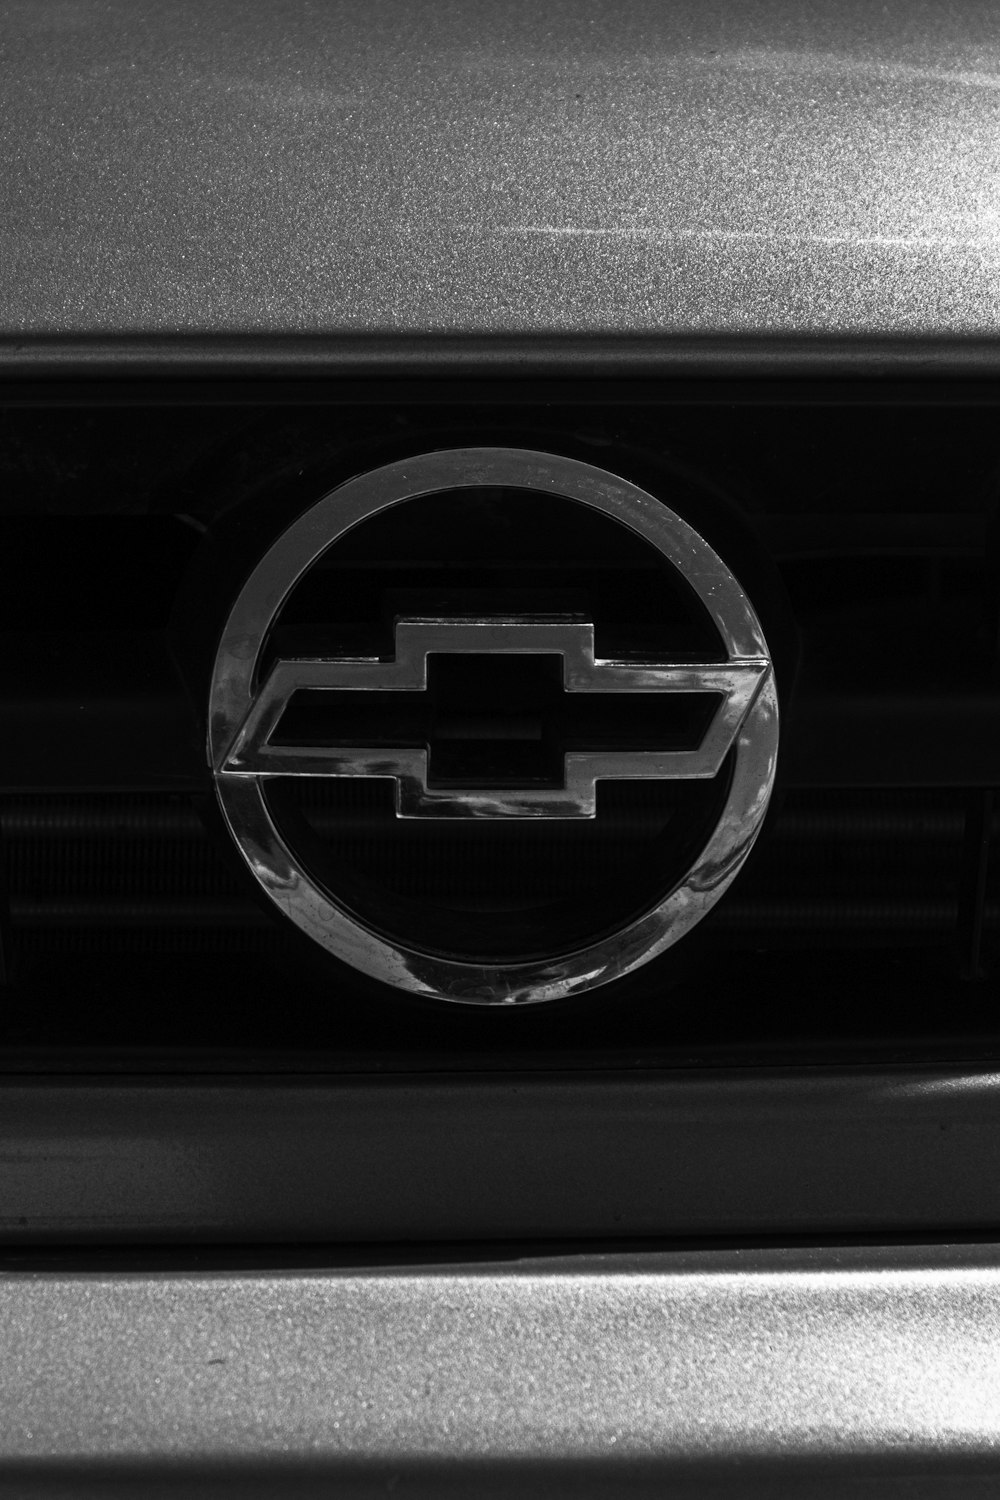 a chevrolet emblem is shown on the front of a car